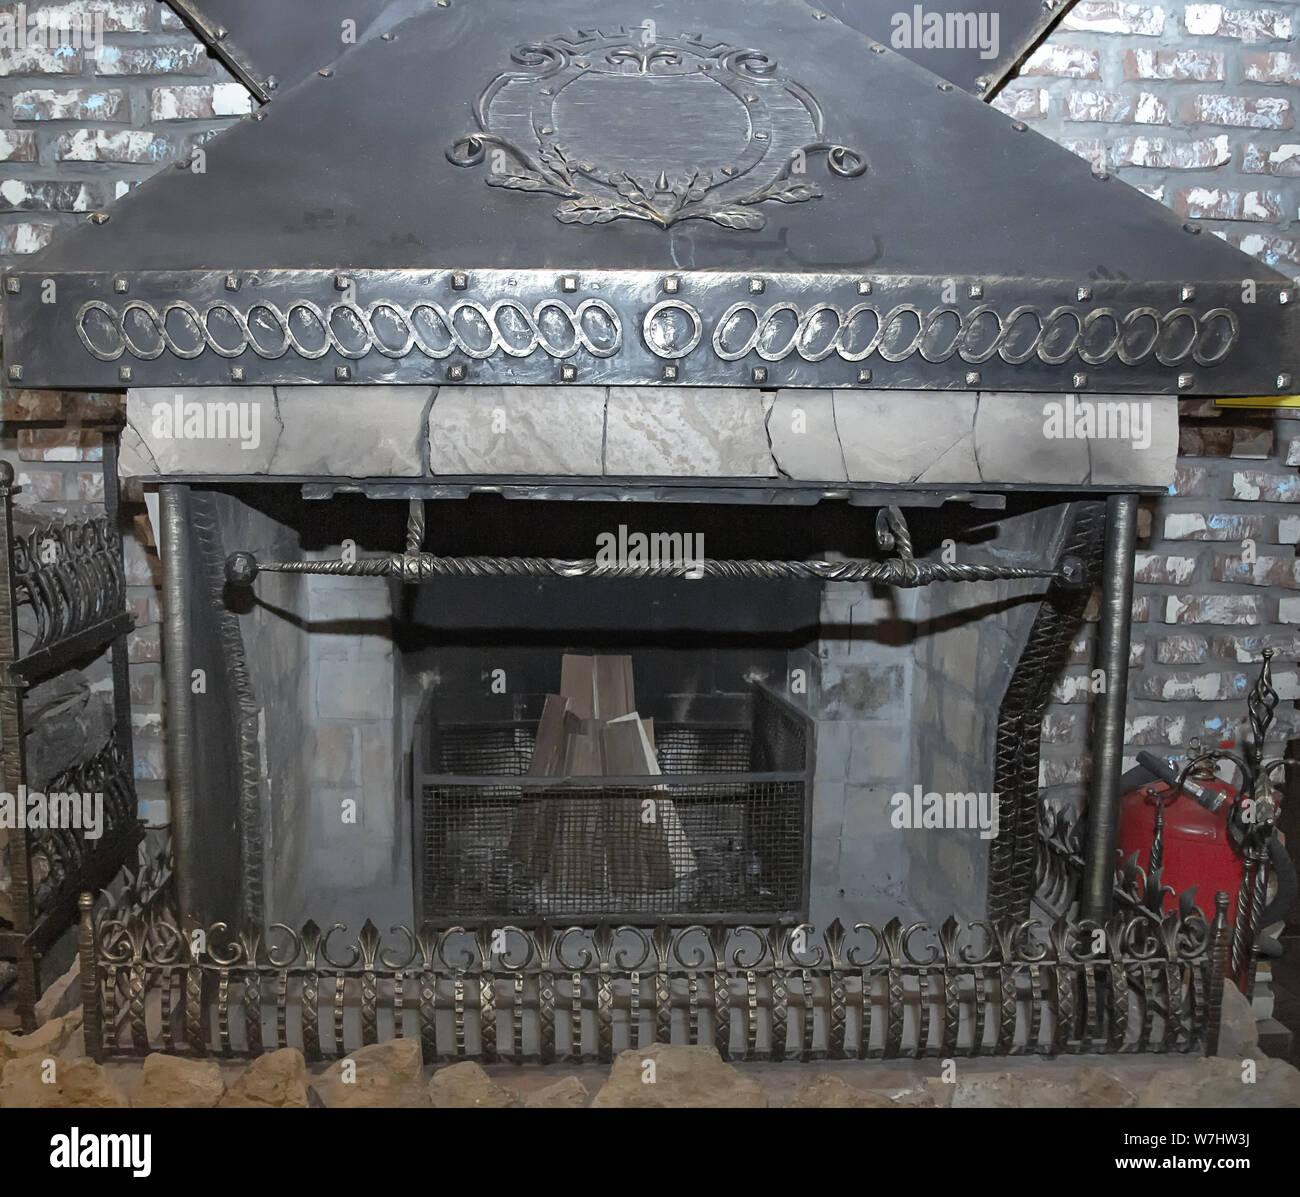 Photo background fireplace stove of iron welded gray welded decorated with metallic decor. Stock Photo